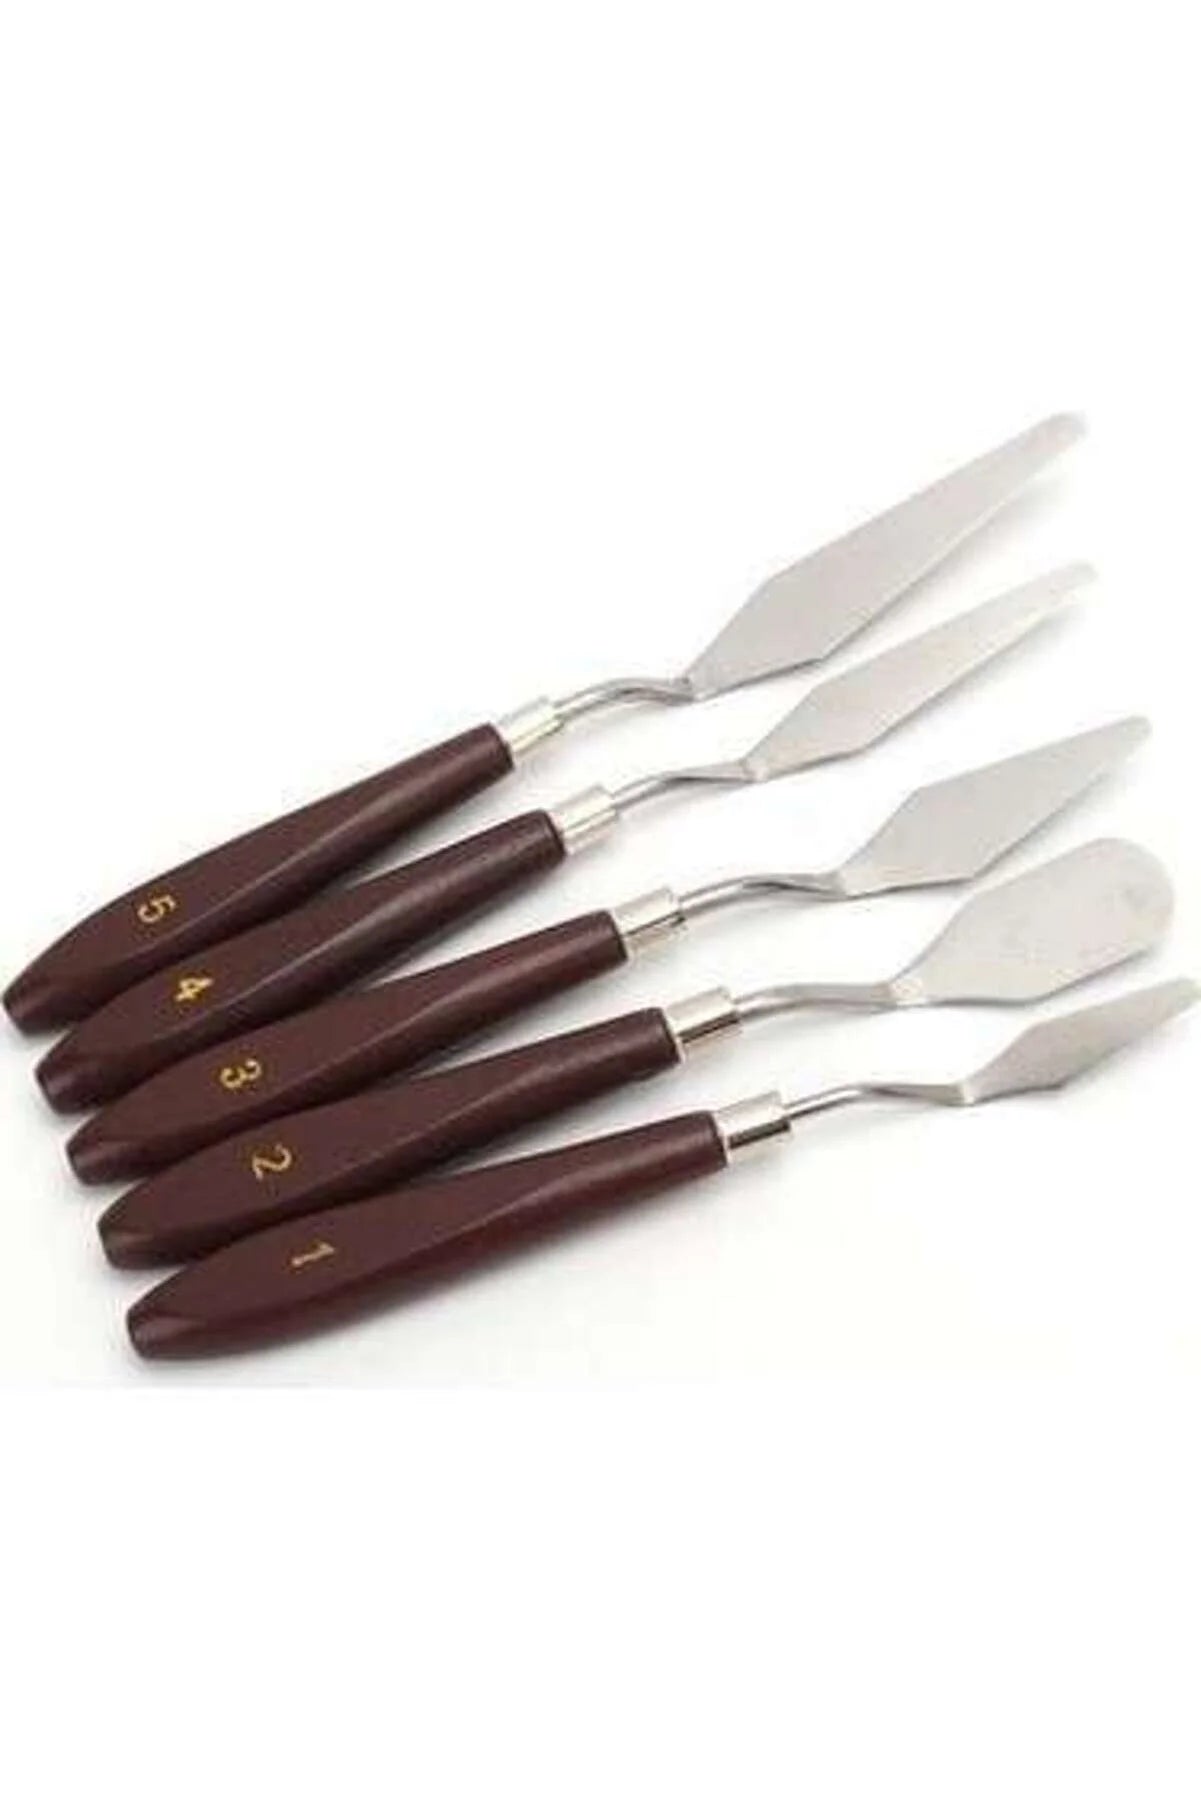 Ch Chinese Knife Set